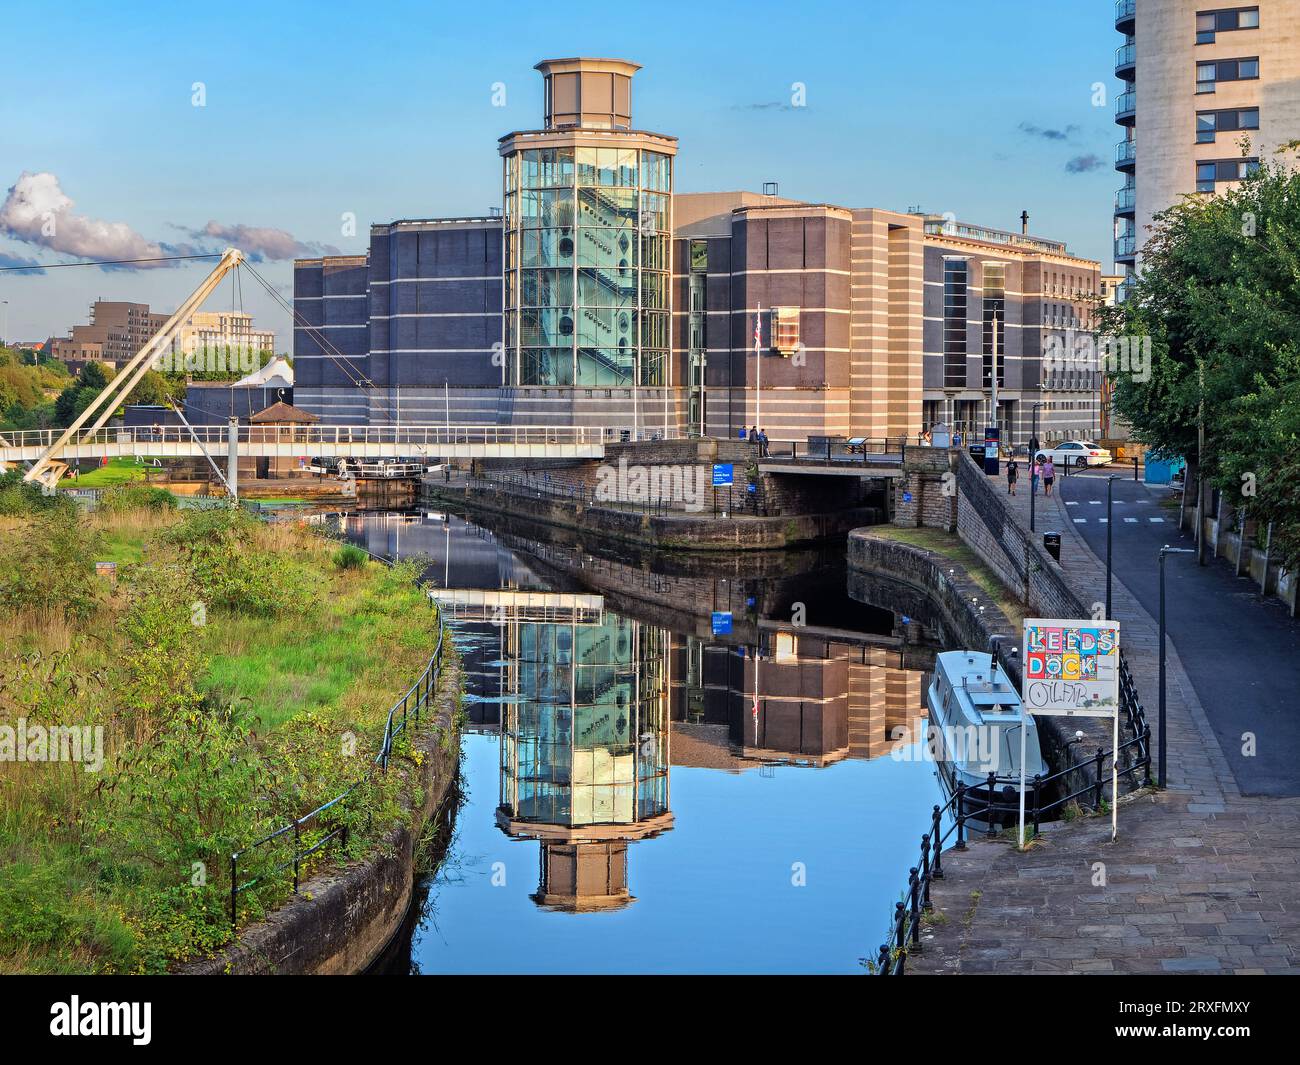 UK, West Yorkshire, Royal Armouries Museum in Leeds Dock Stock Photo